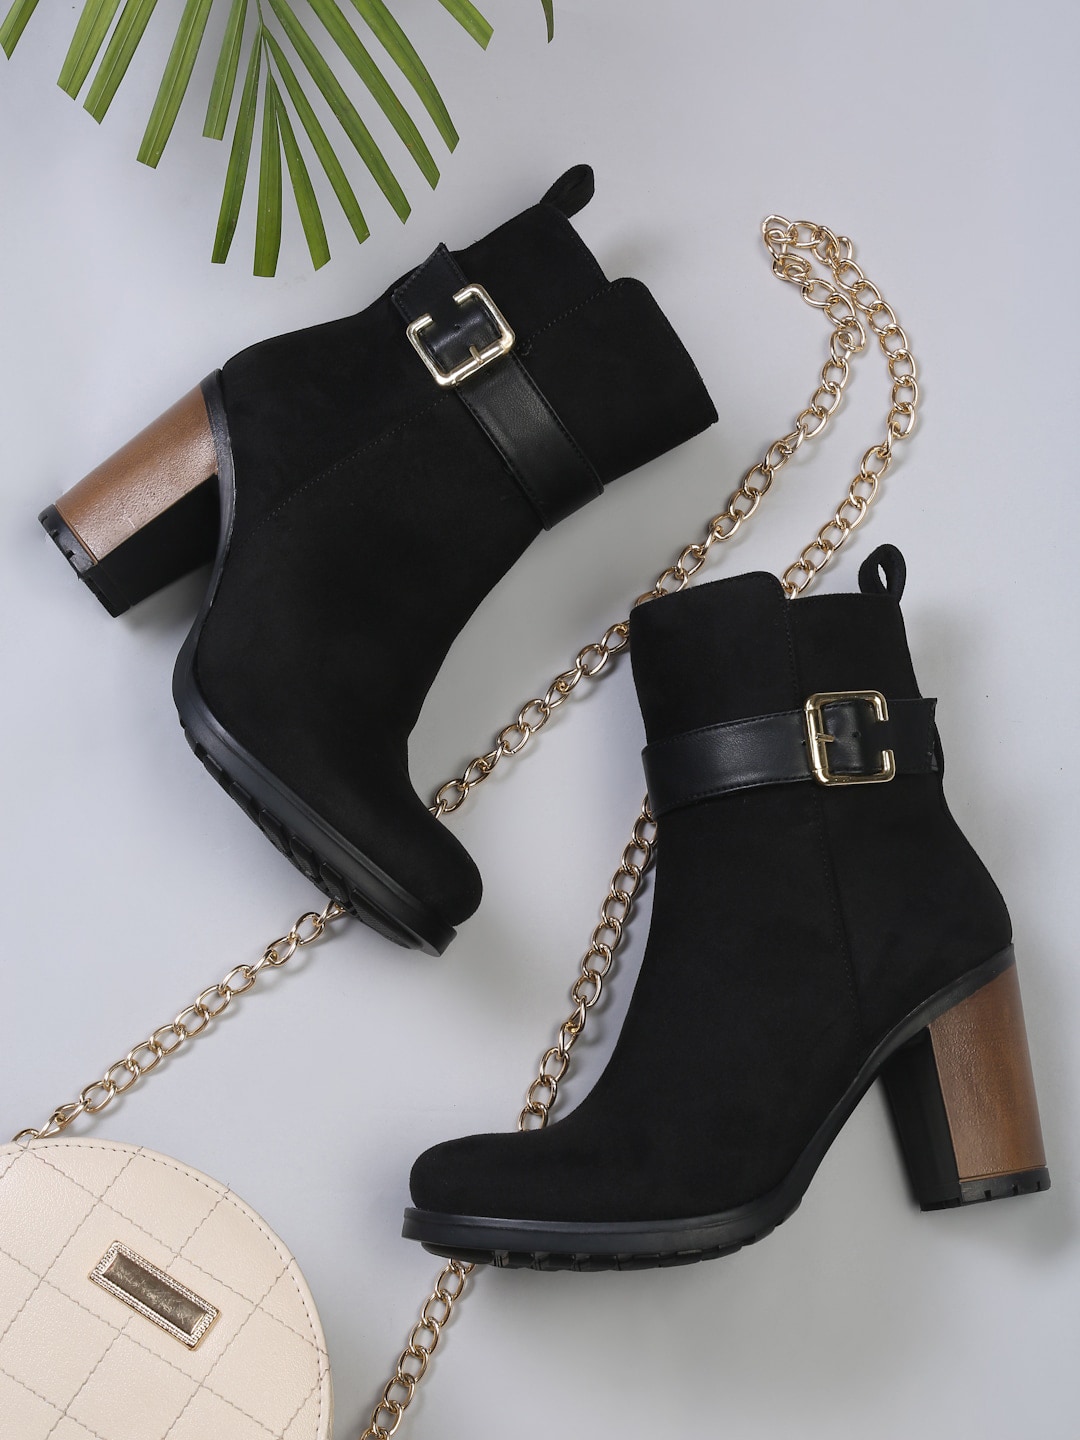 Roadster Black Suede Block Heeled Boots with Buckles Price in India